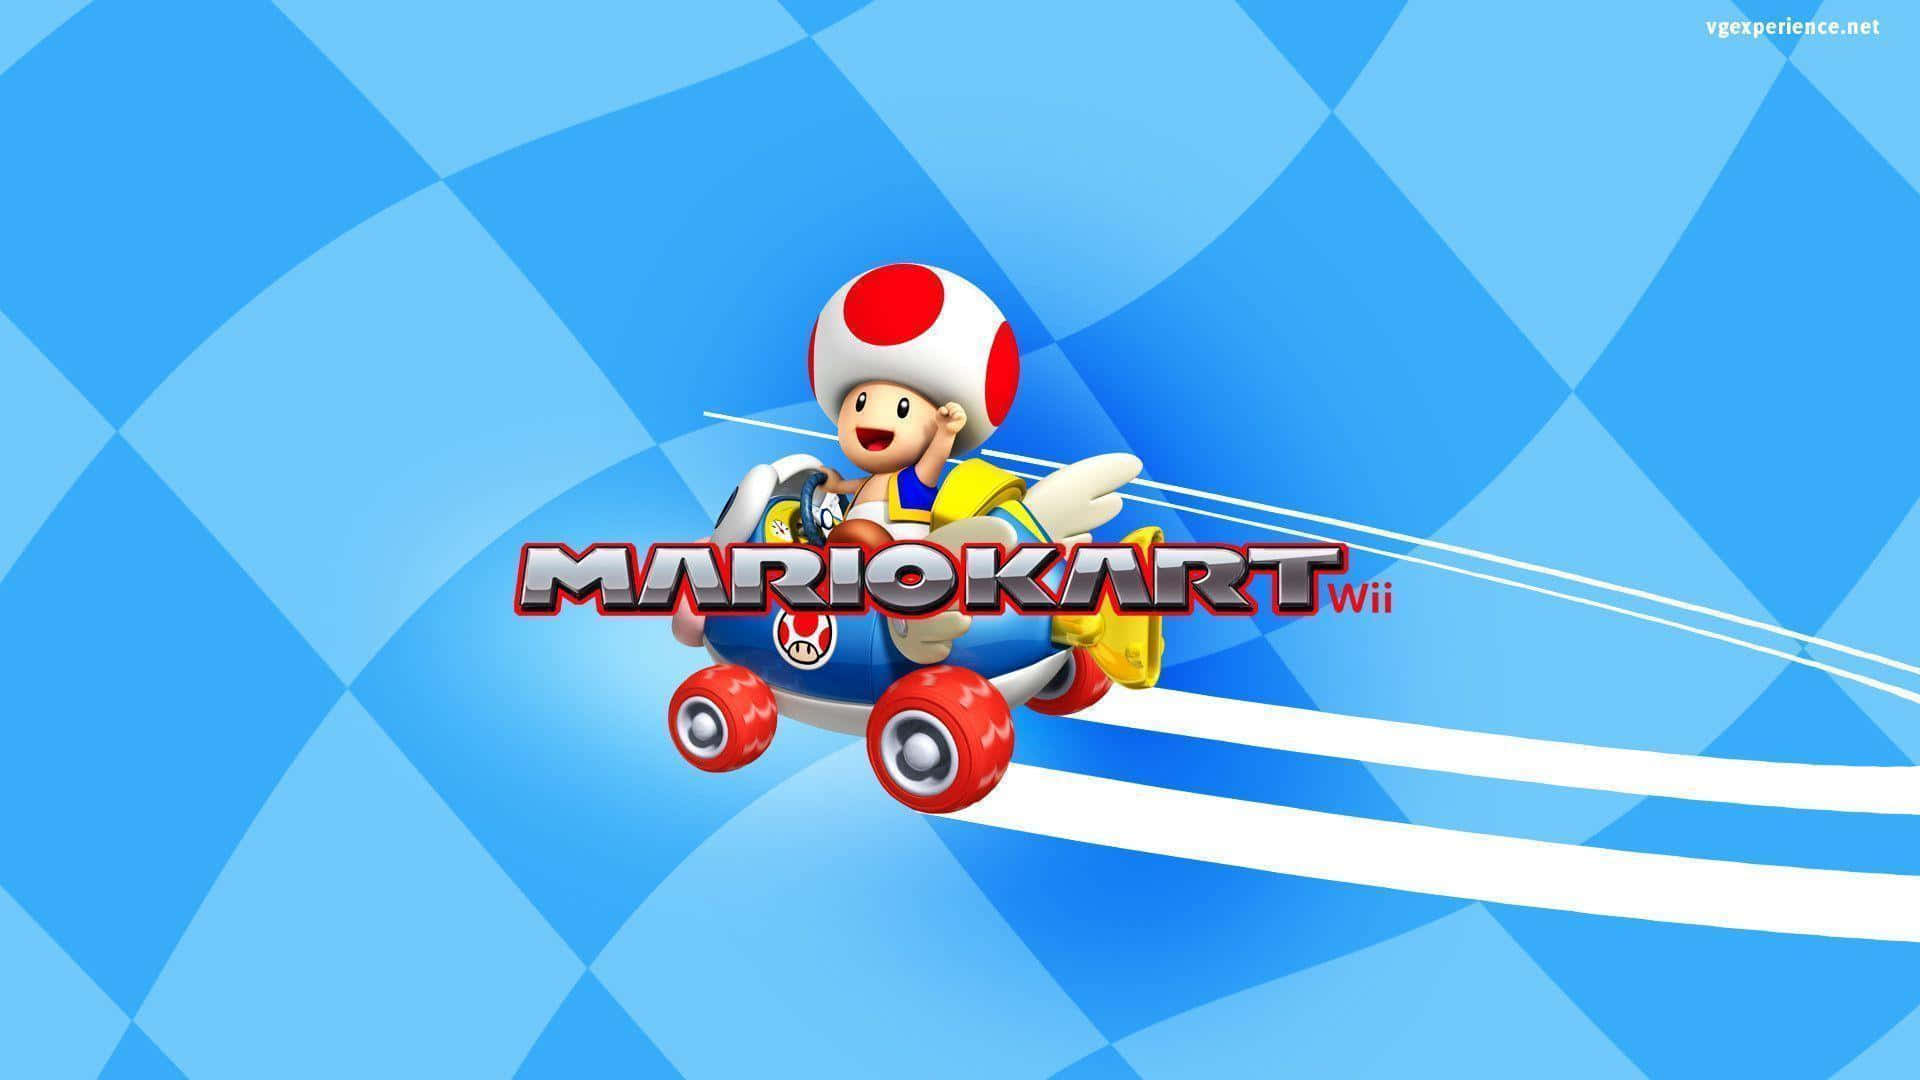 "Be the one to master the bones-rattling Mario Kart tracks!"